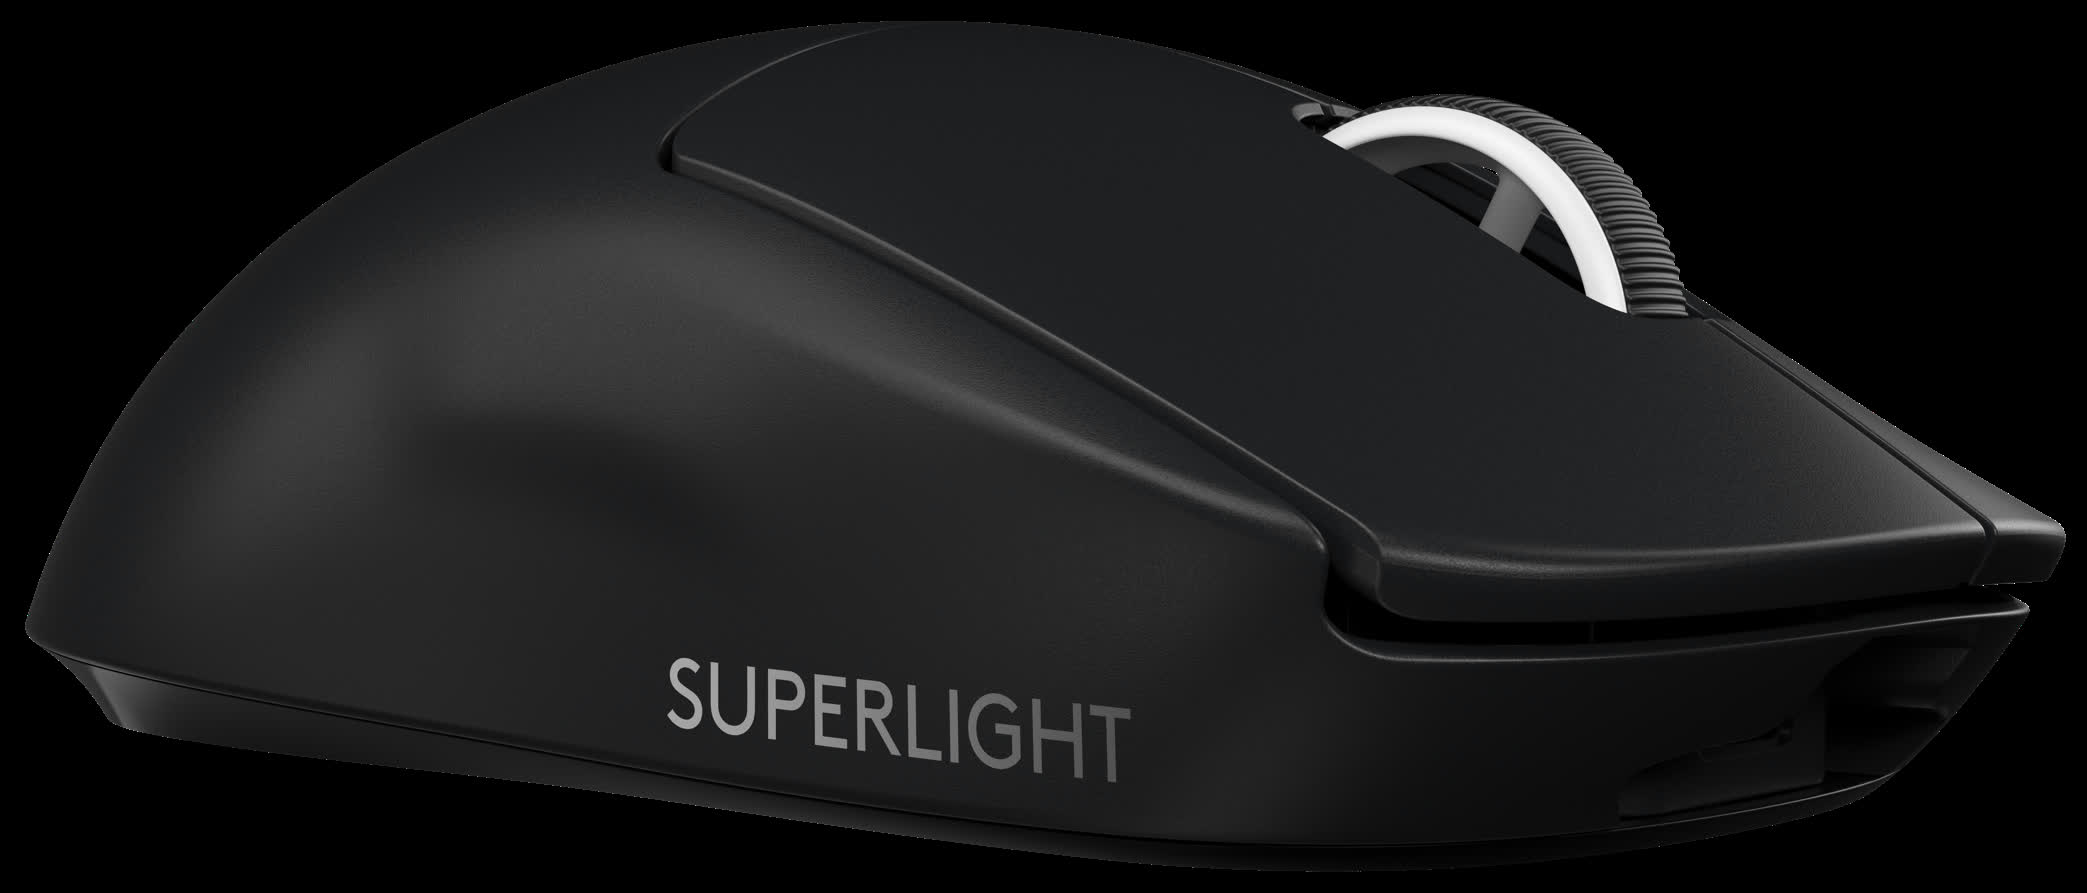 Logitech unveils its lightest and fastest wireless esports mouse to date